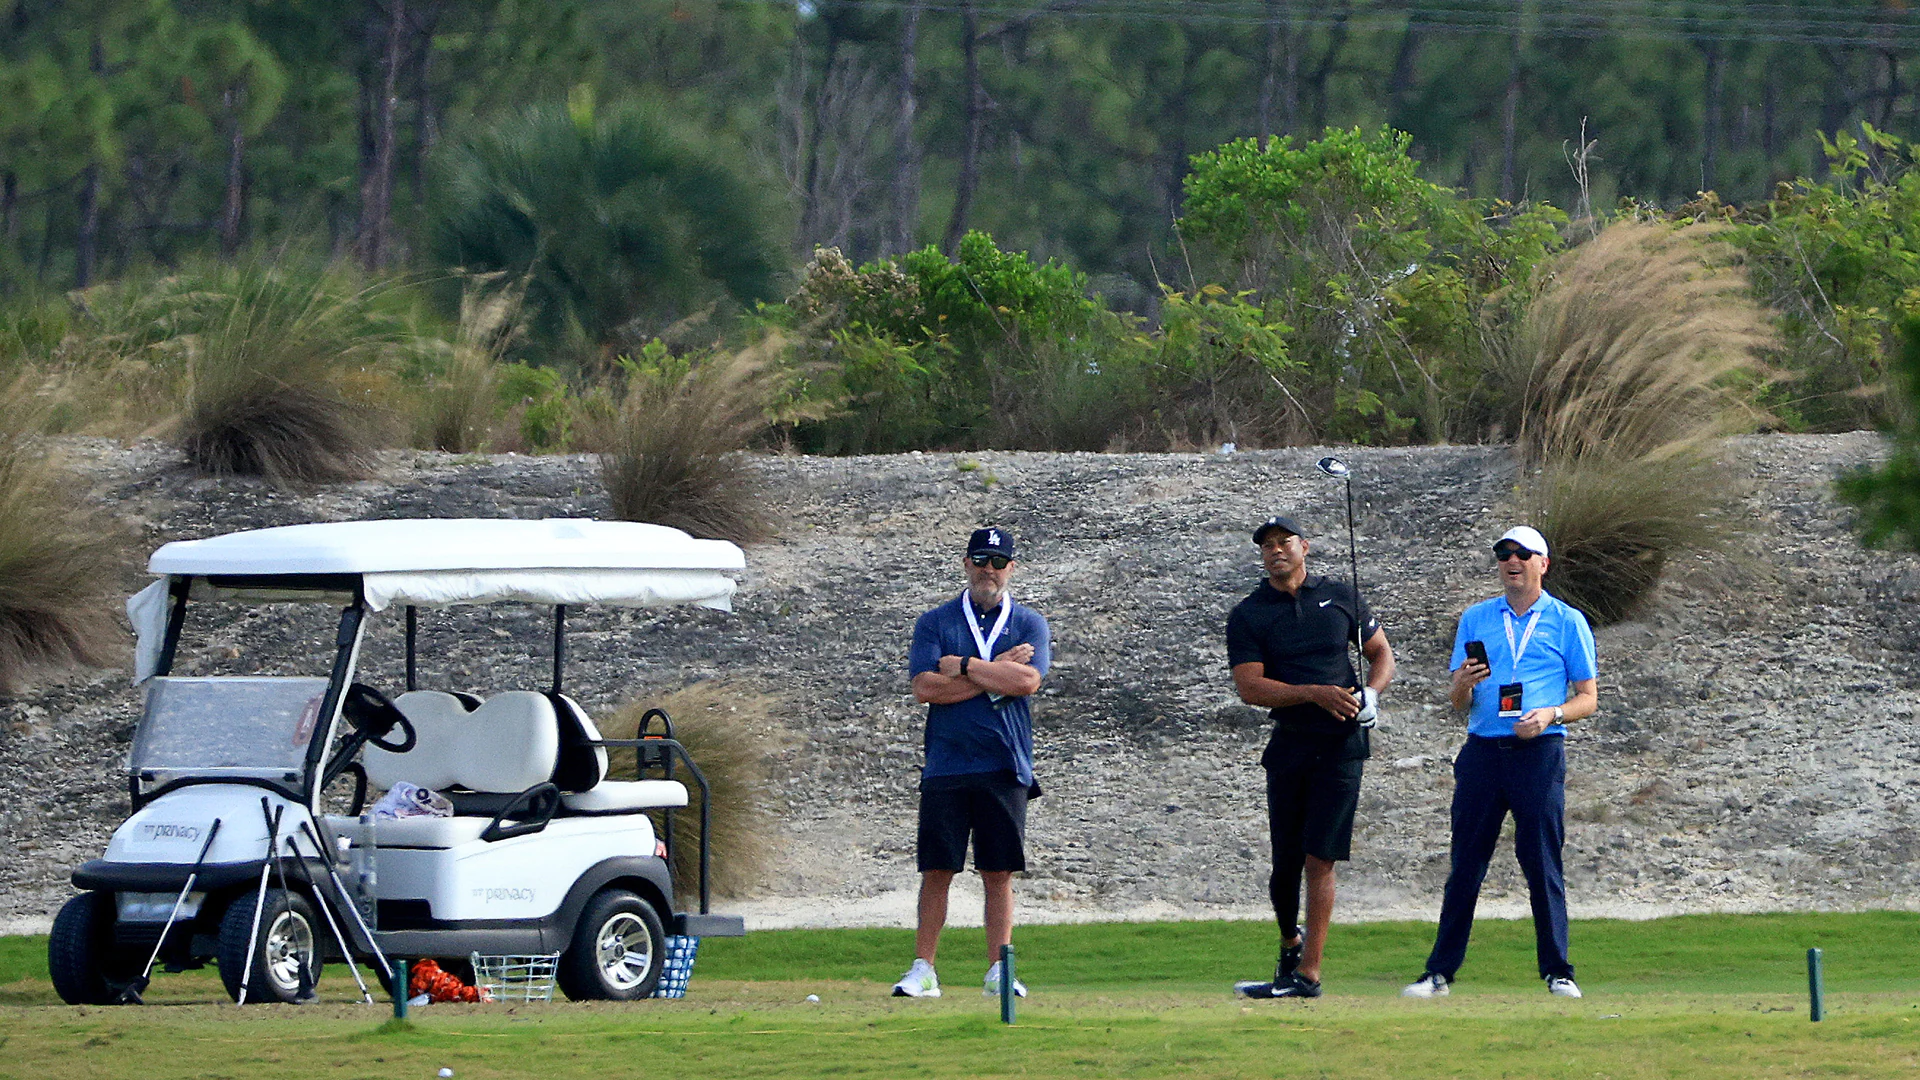 Tiger Woods spotted hitting drivers on range in Bahamas